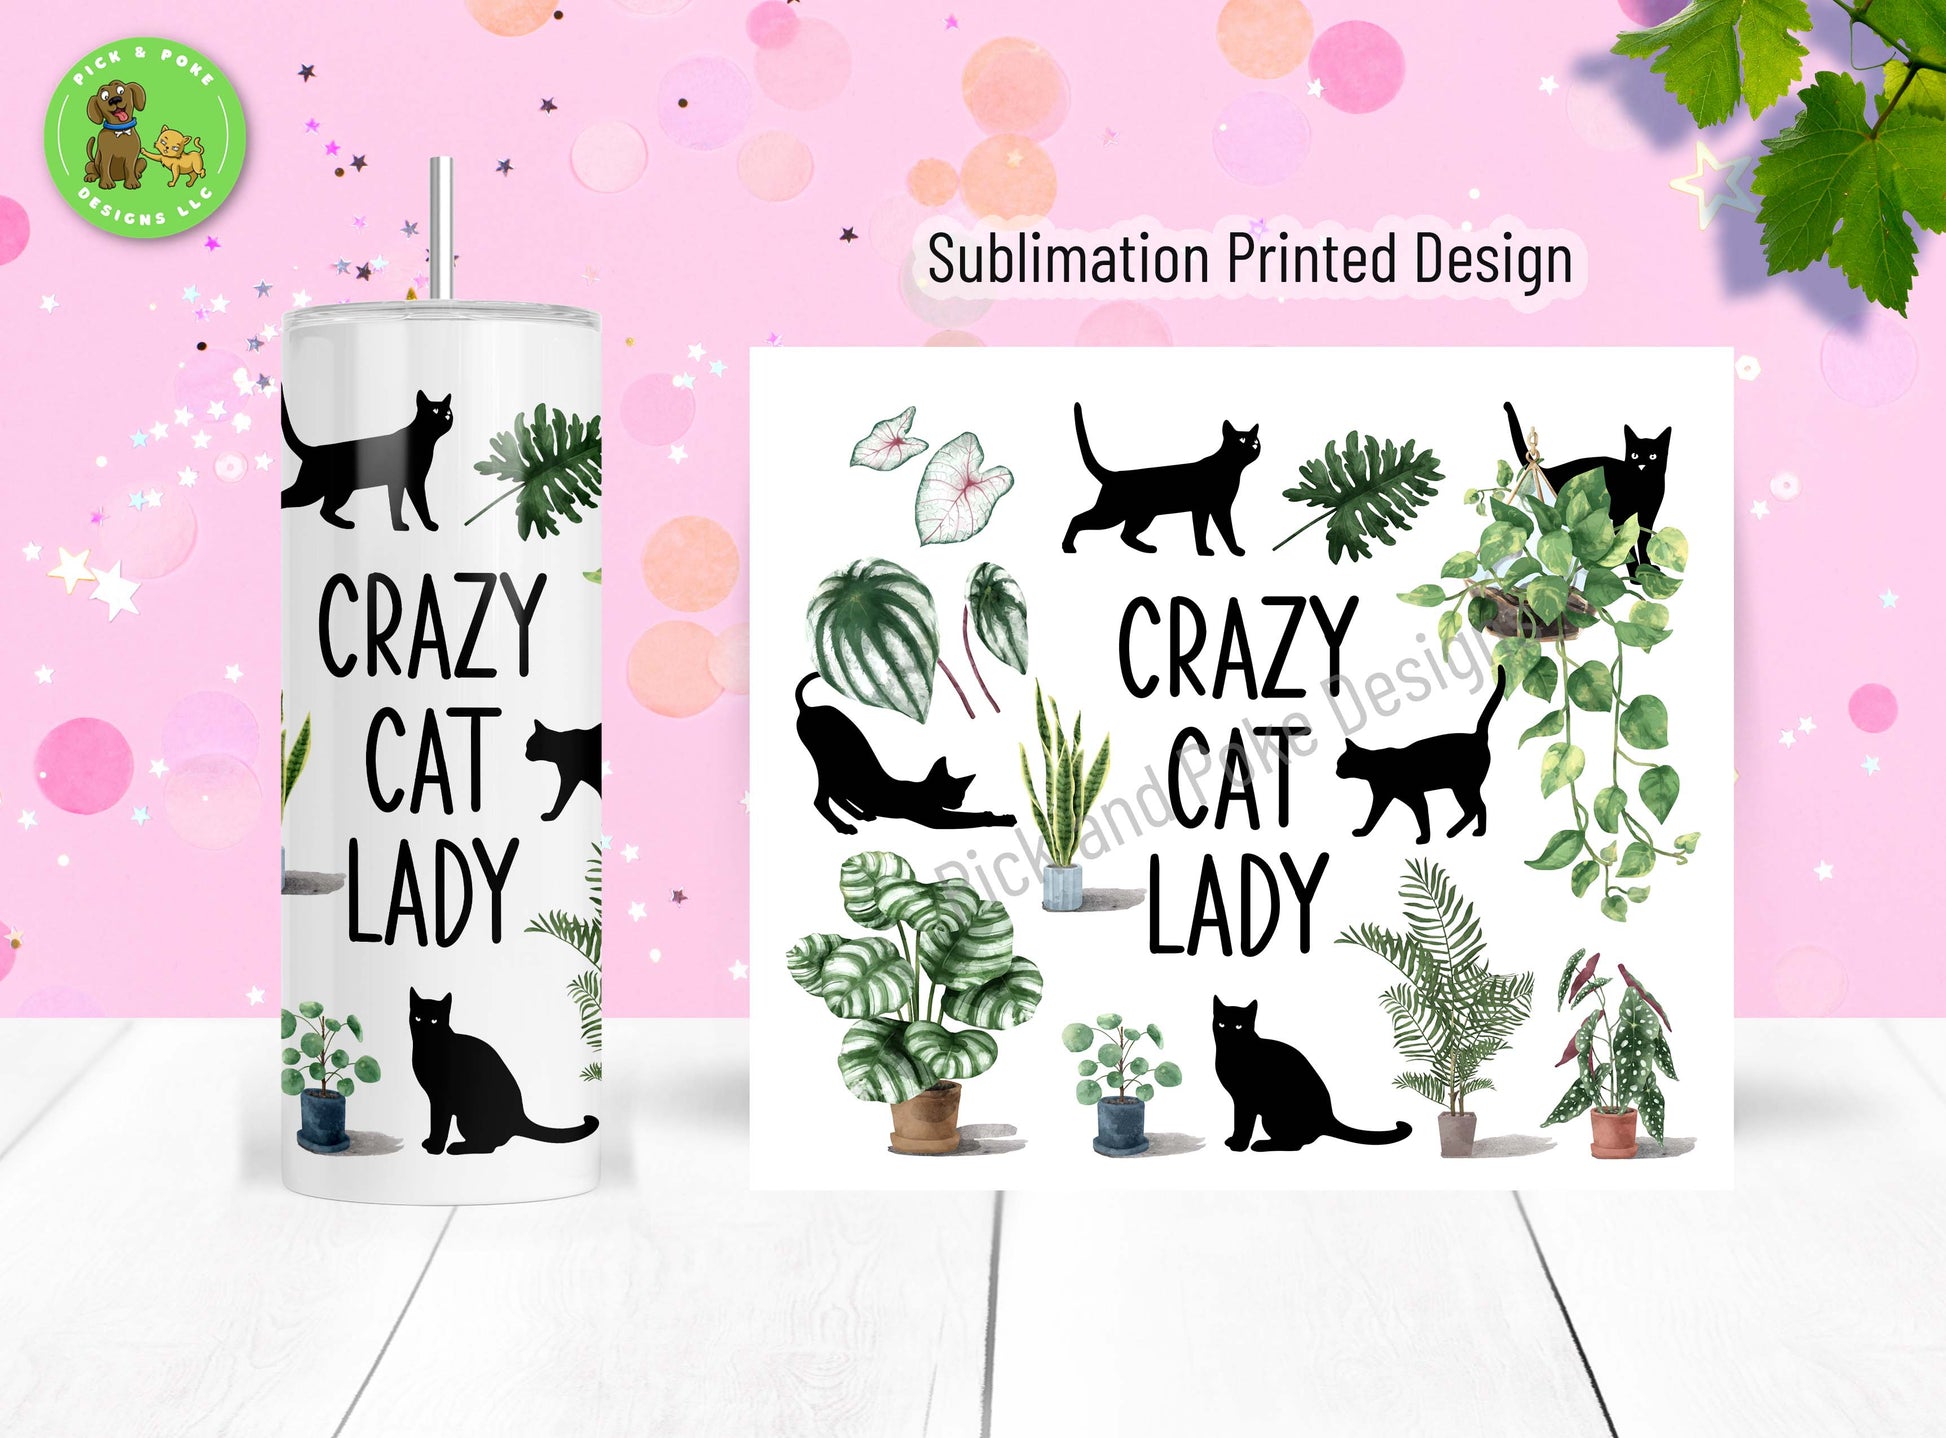 Crazy Cat Lady design is sublimated on a 20oz stainless steel tumbler